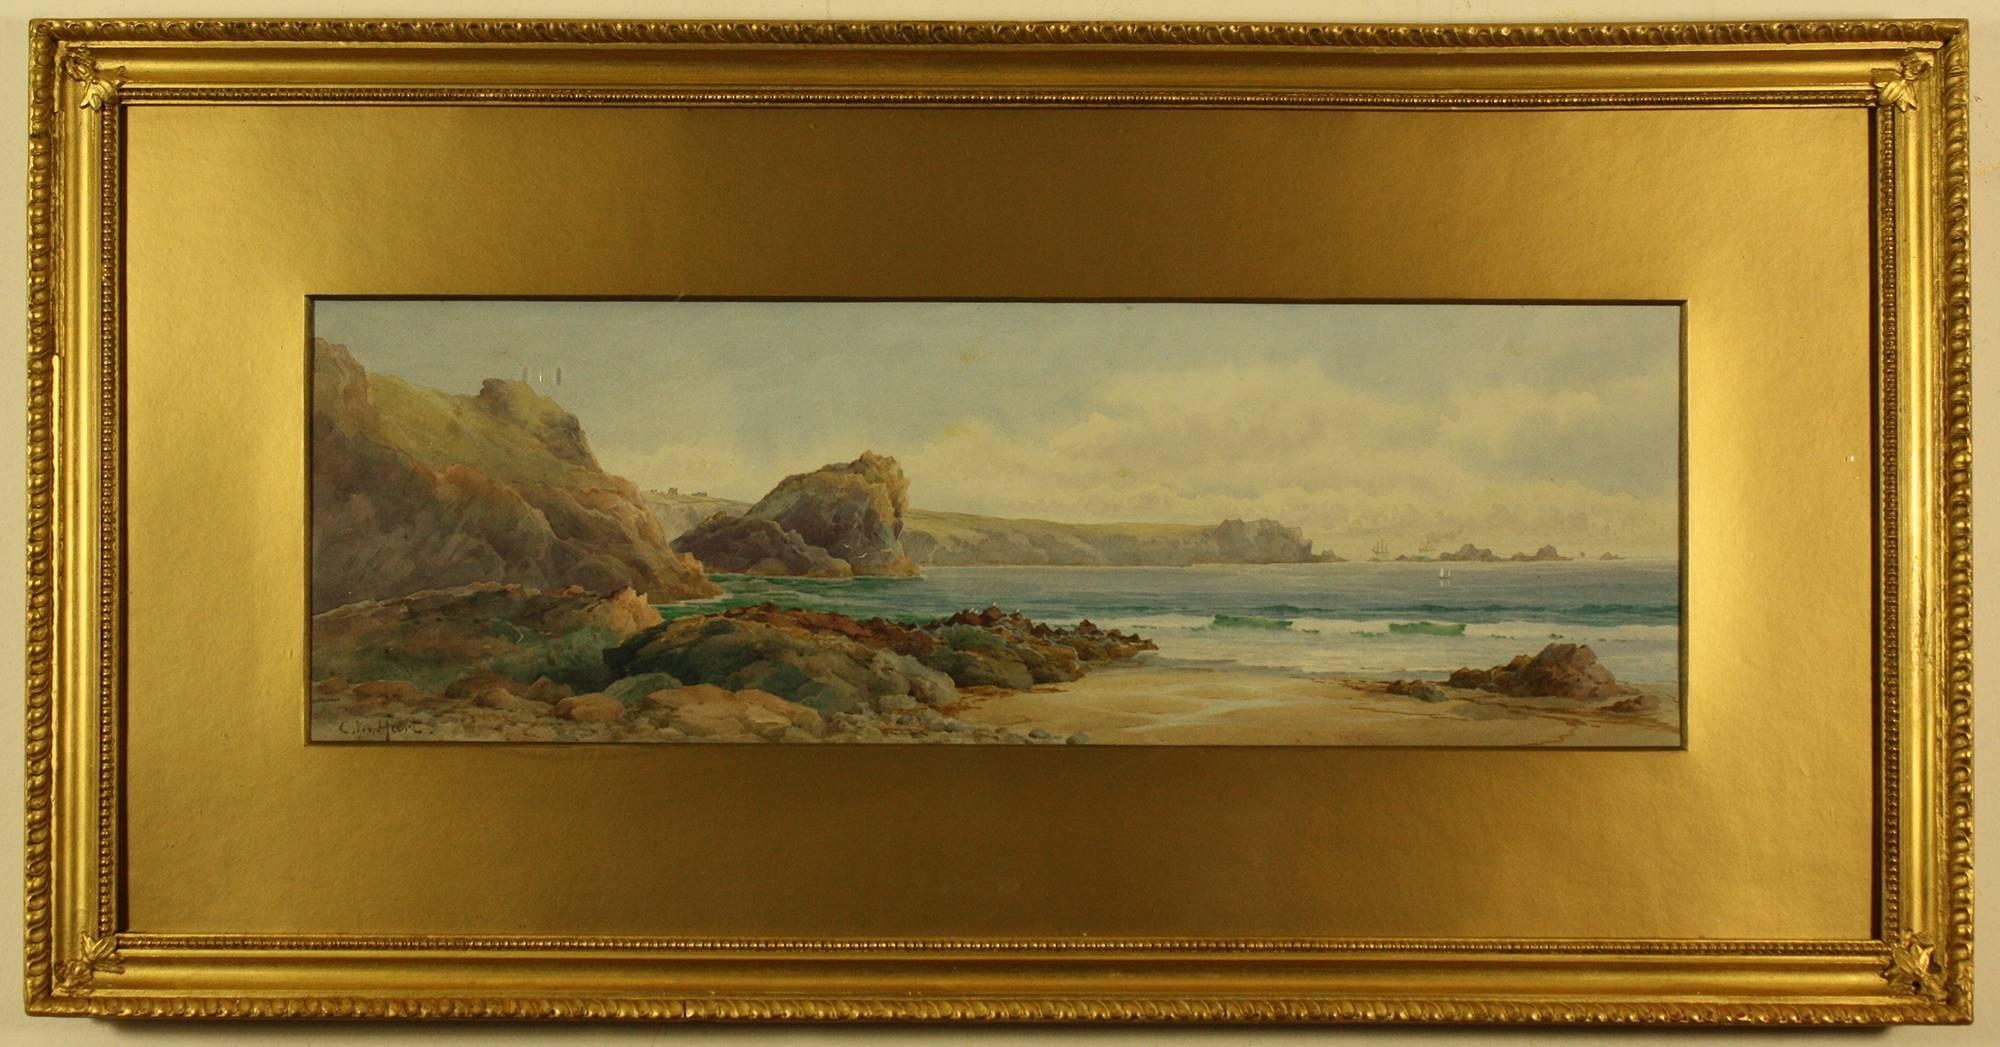 Lion Rock and the Lizard Point from Kynance Cove by Claude Montague Hart 

Watercolour Original Glass Frame and Mount
Image Size  20.5 ins by 6.5 ins
Overall Frame Size 28.75 ins by 15 ins
Claude Montague Hart
Born 1869 The Lizard Cornwall, Died